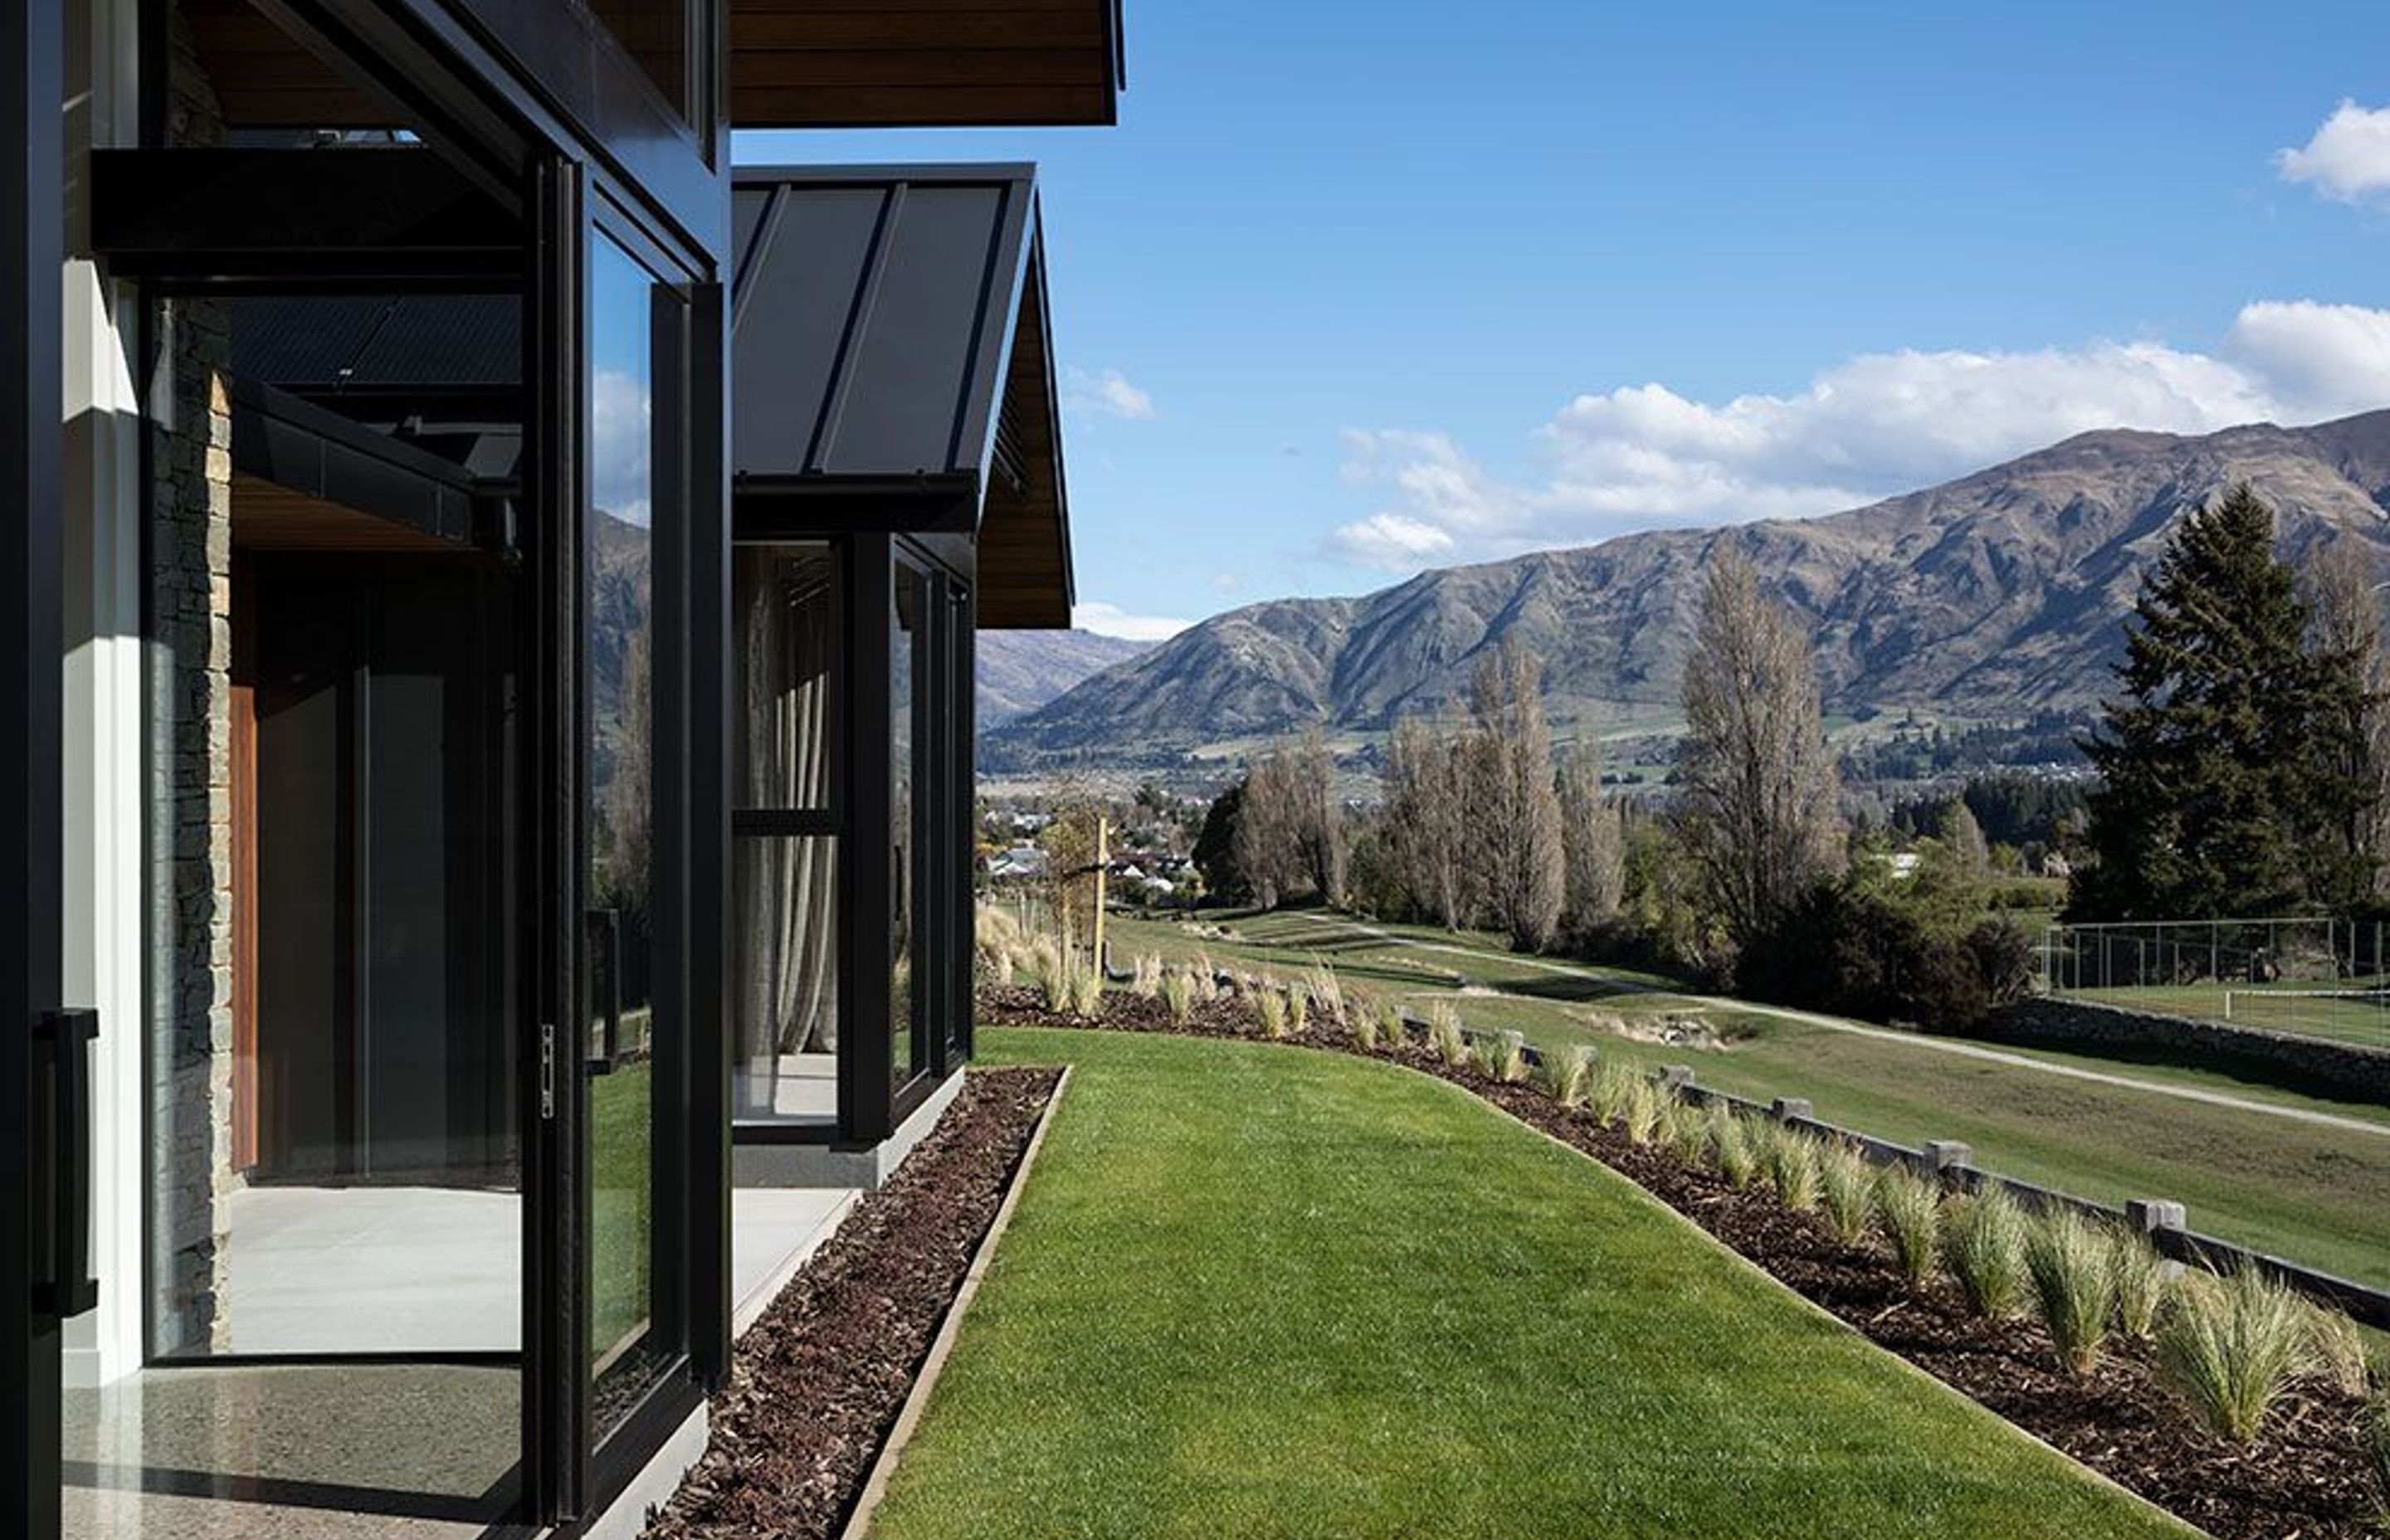 The house sits on an elevated site with views towards Black Peak, Treble Cone and Lake Wanaka.